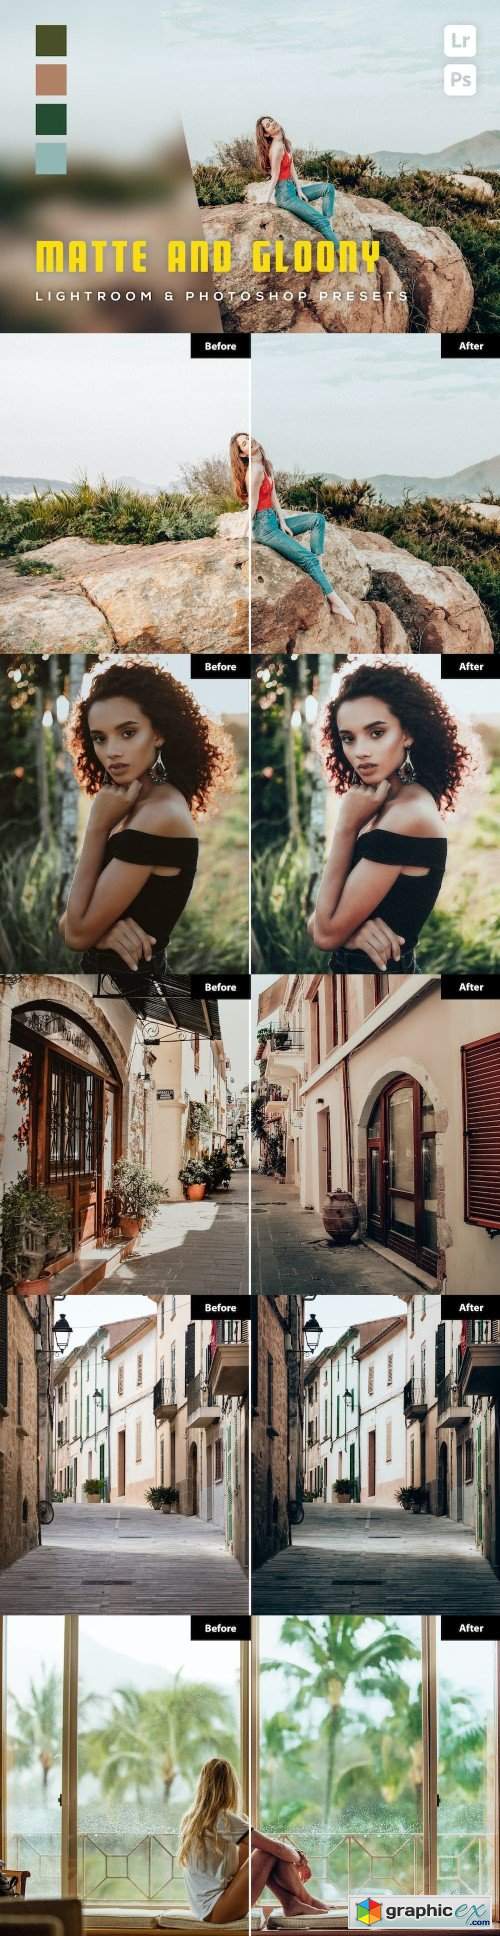 6 Matte and gloony Lightroom and Photoshop Presets